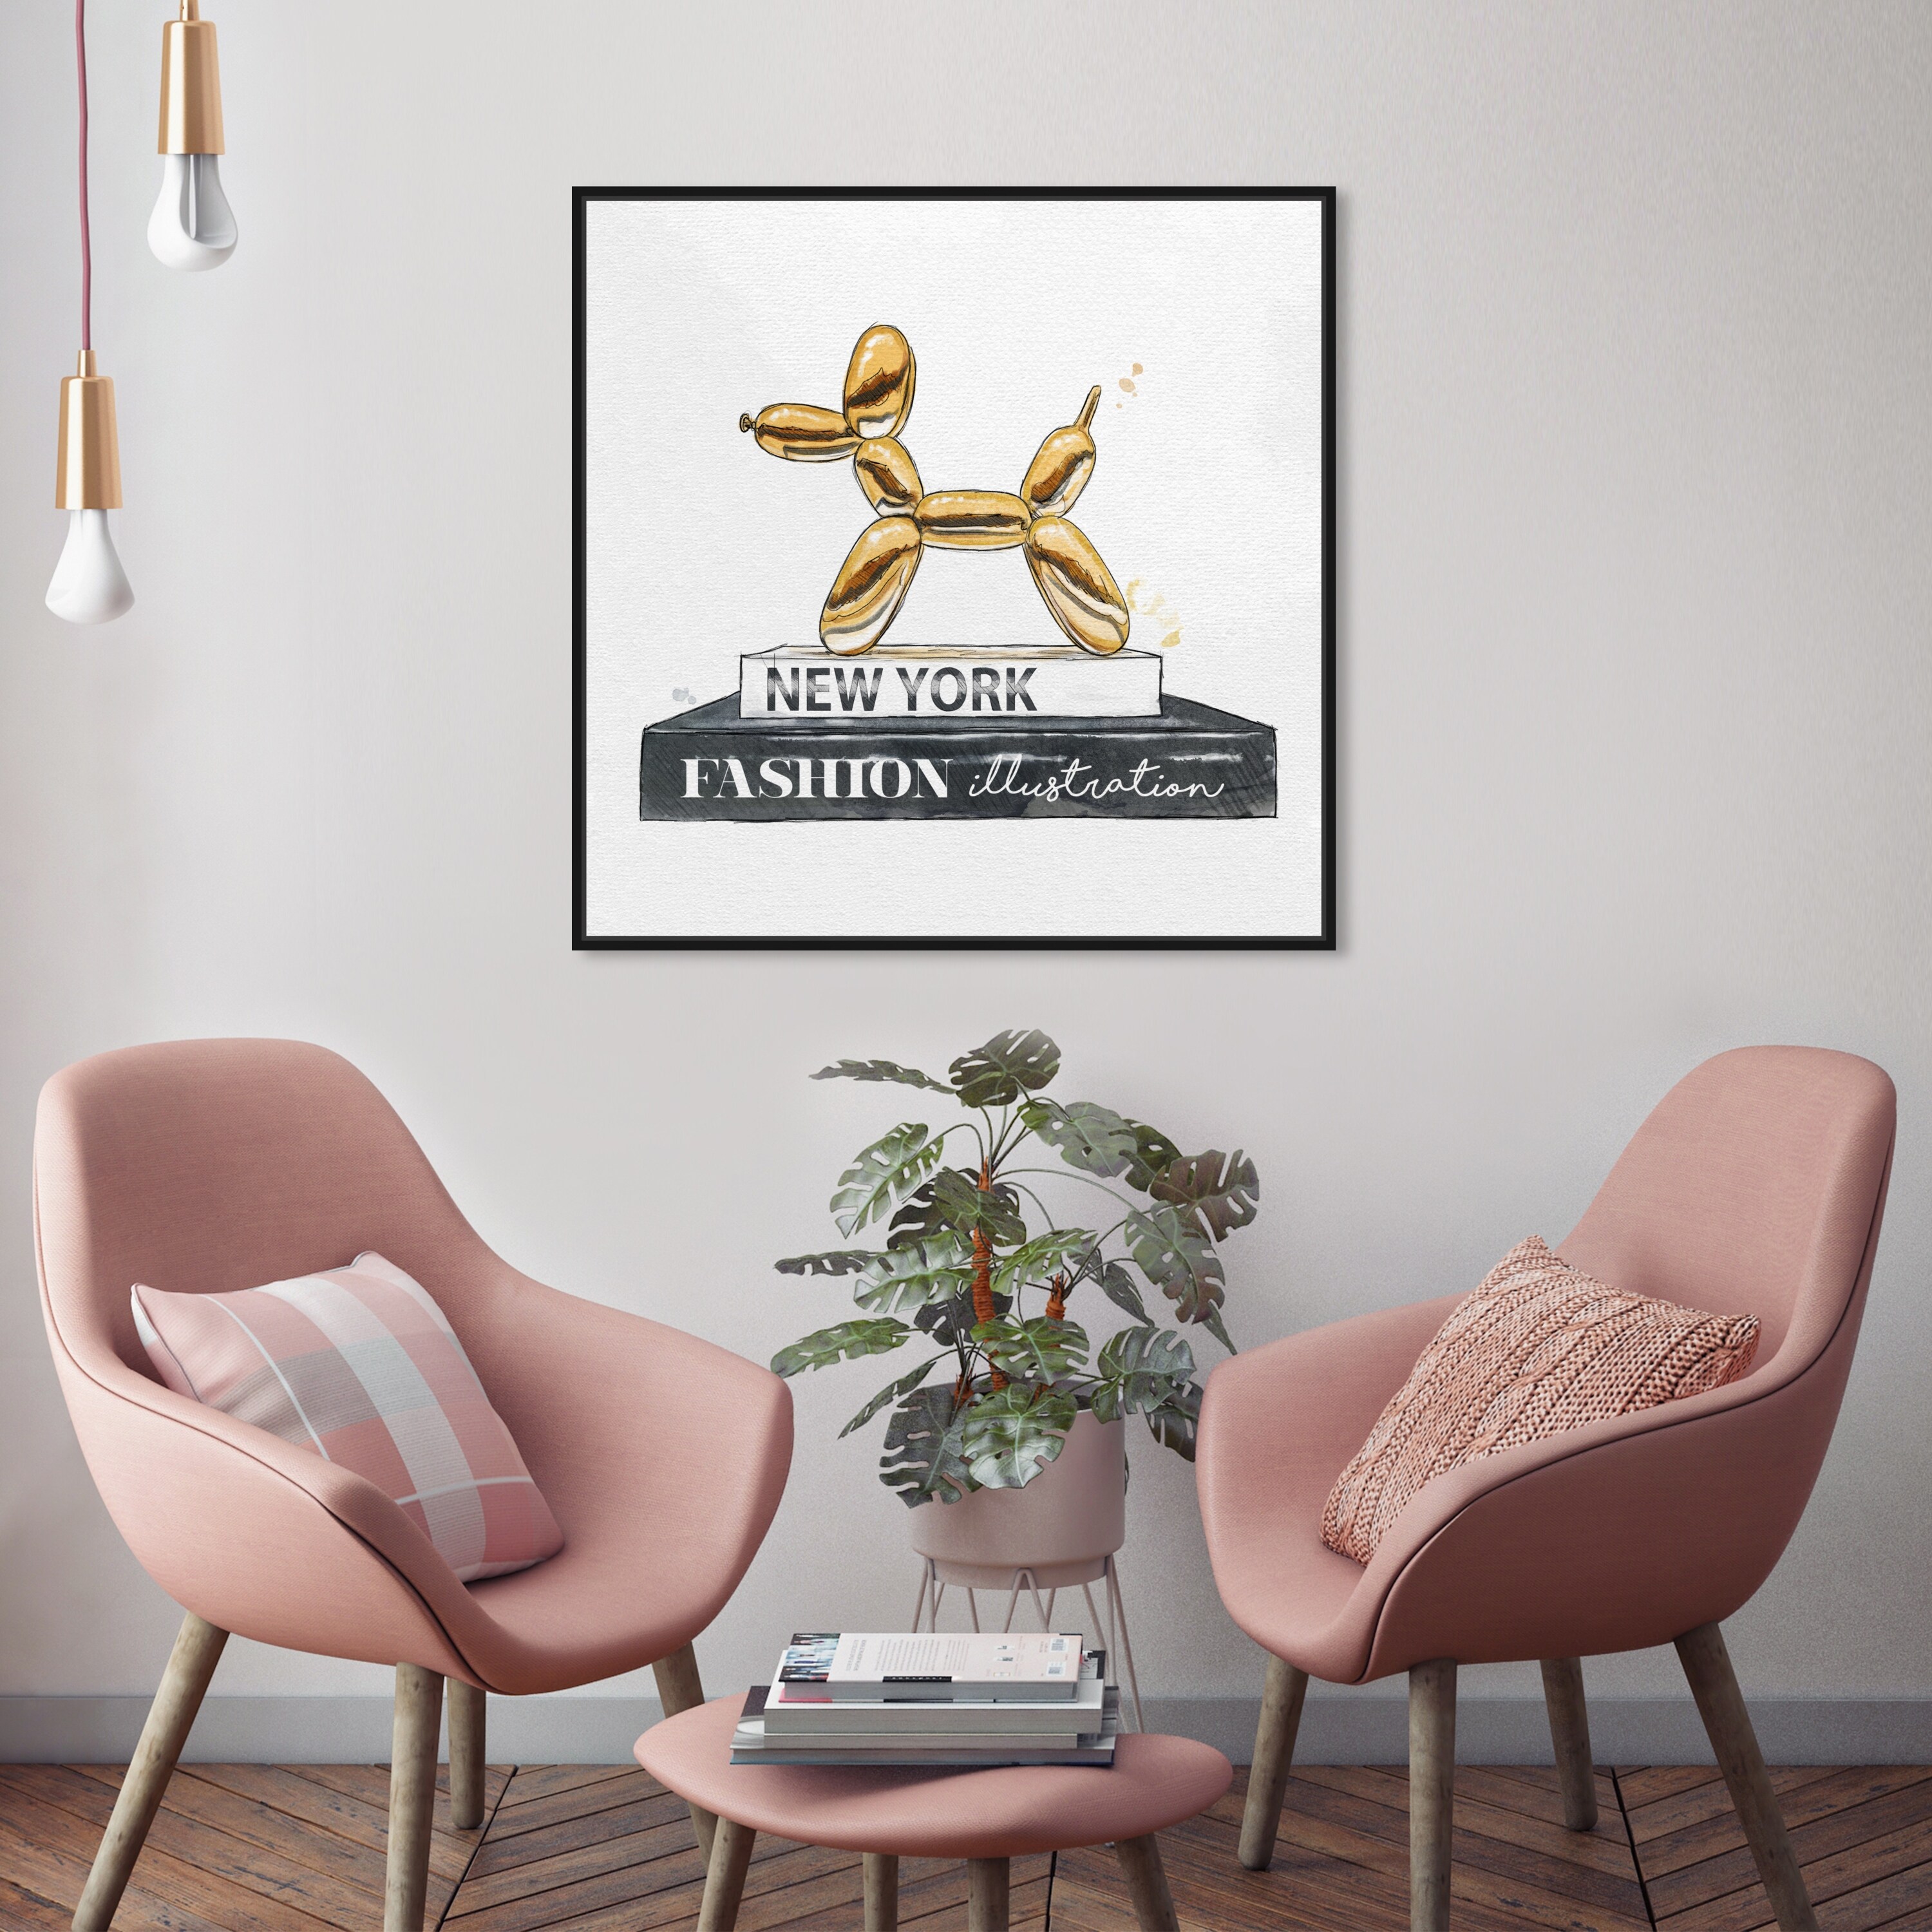 Oliver Gal 'Balloon Dog Library' Fashion and Glam Framed Wall Art